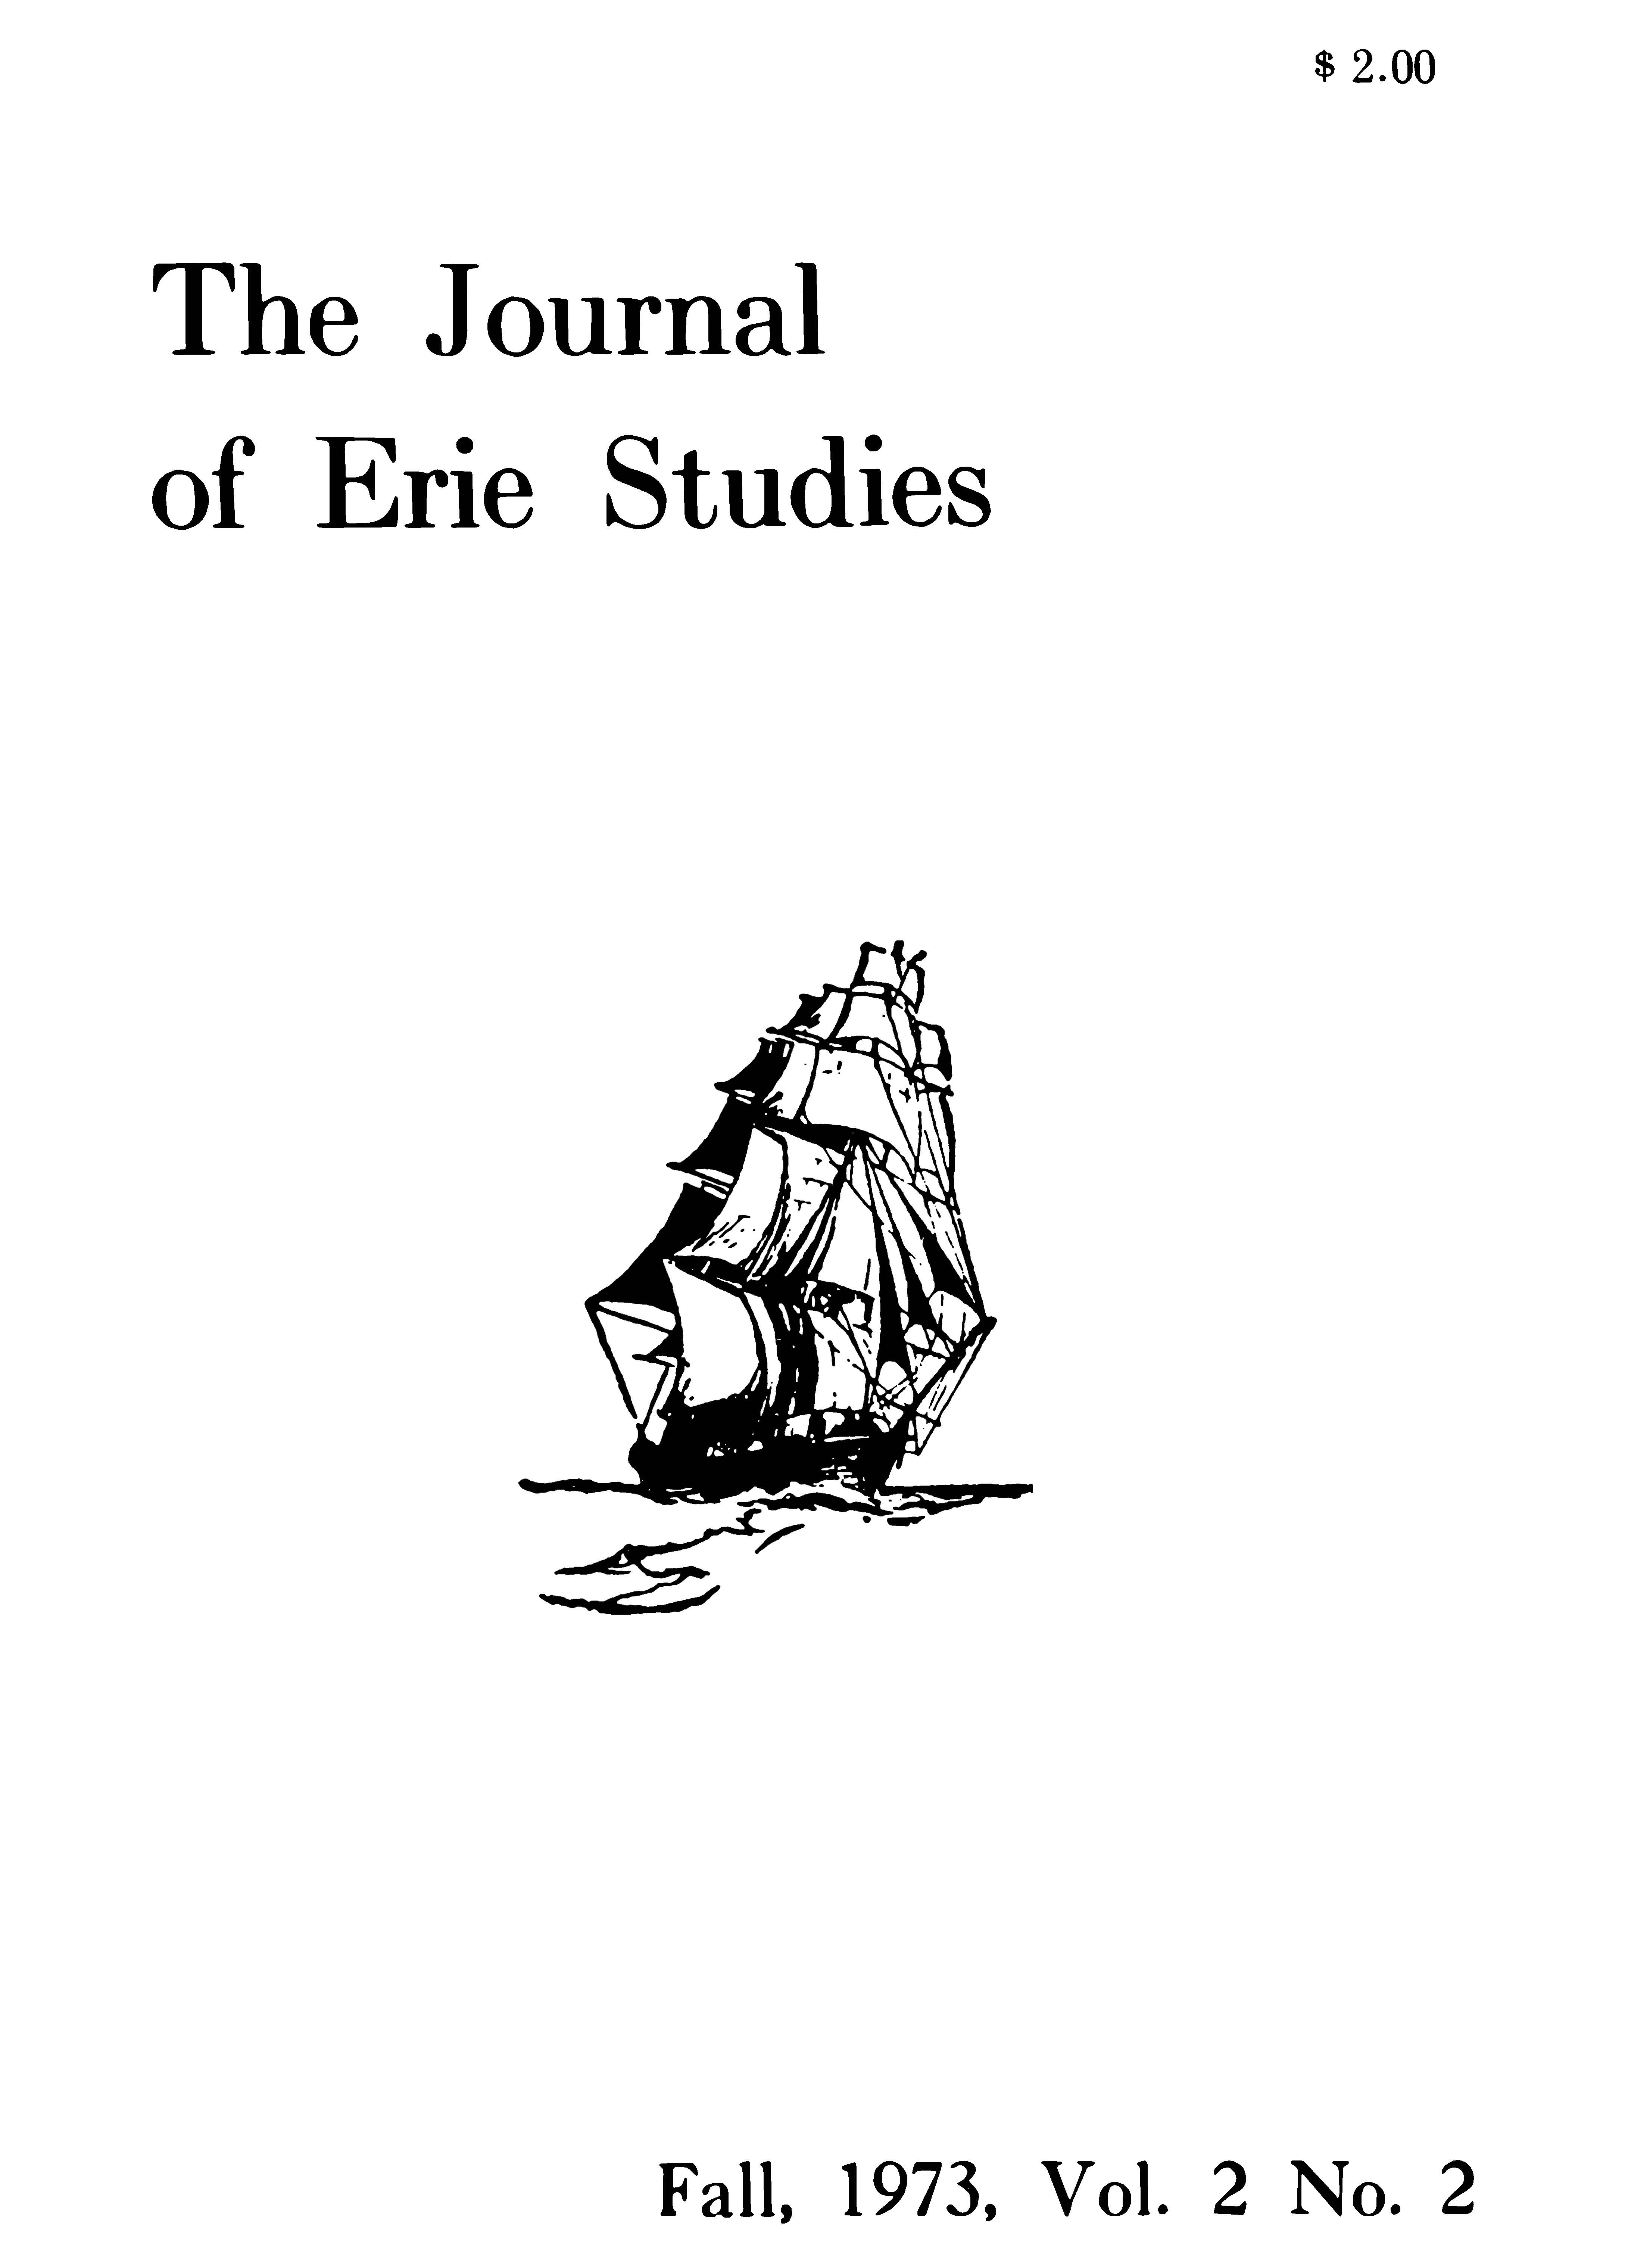 Sketch of a ship with the text, "The Journal of Erie Studies, Fall, 1973, Vol. 2, No. 2."